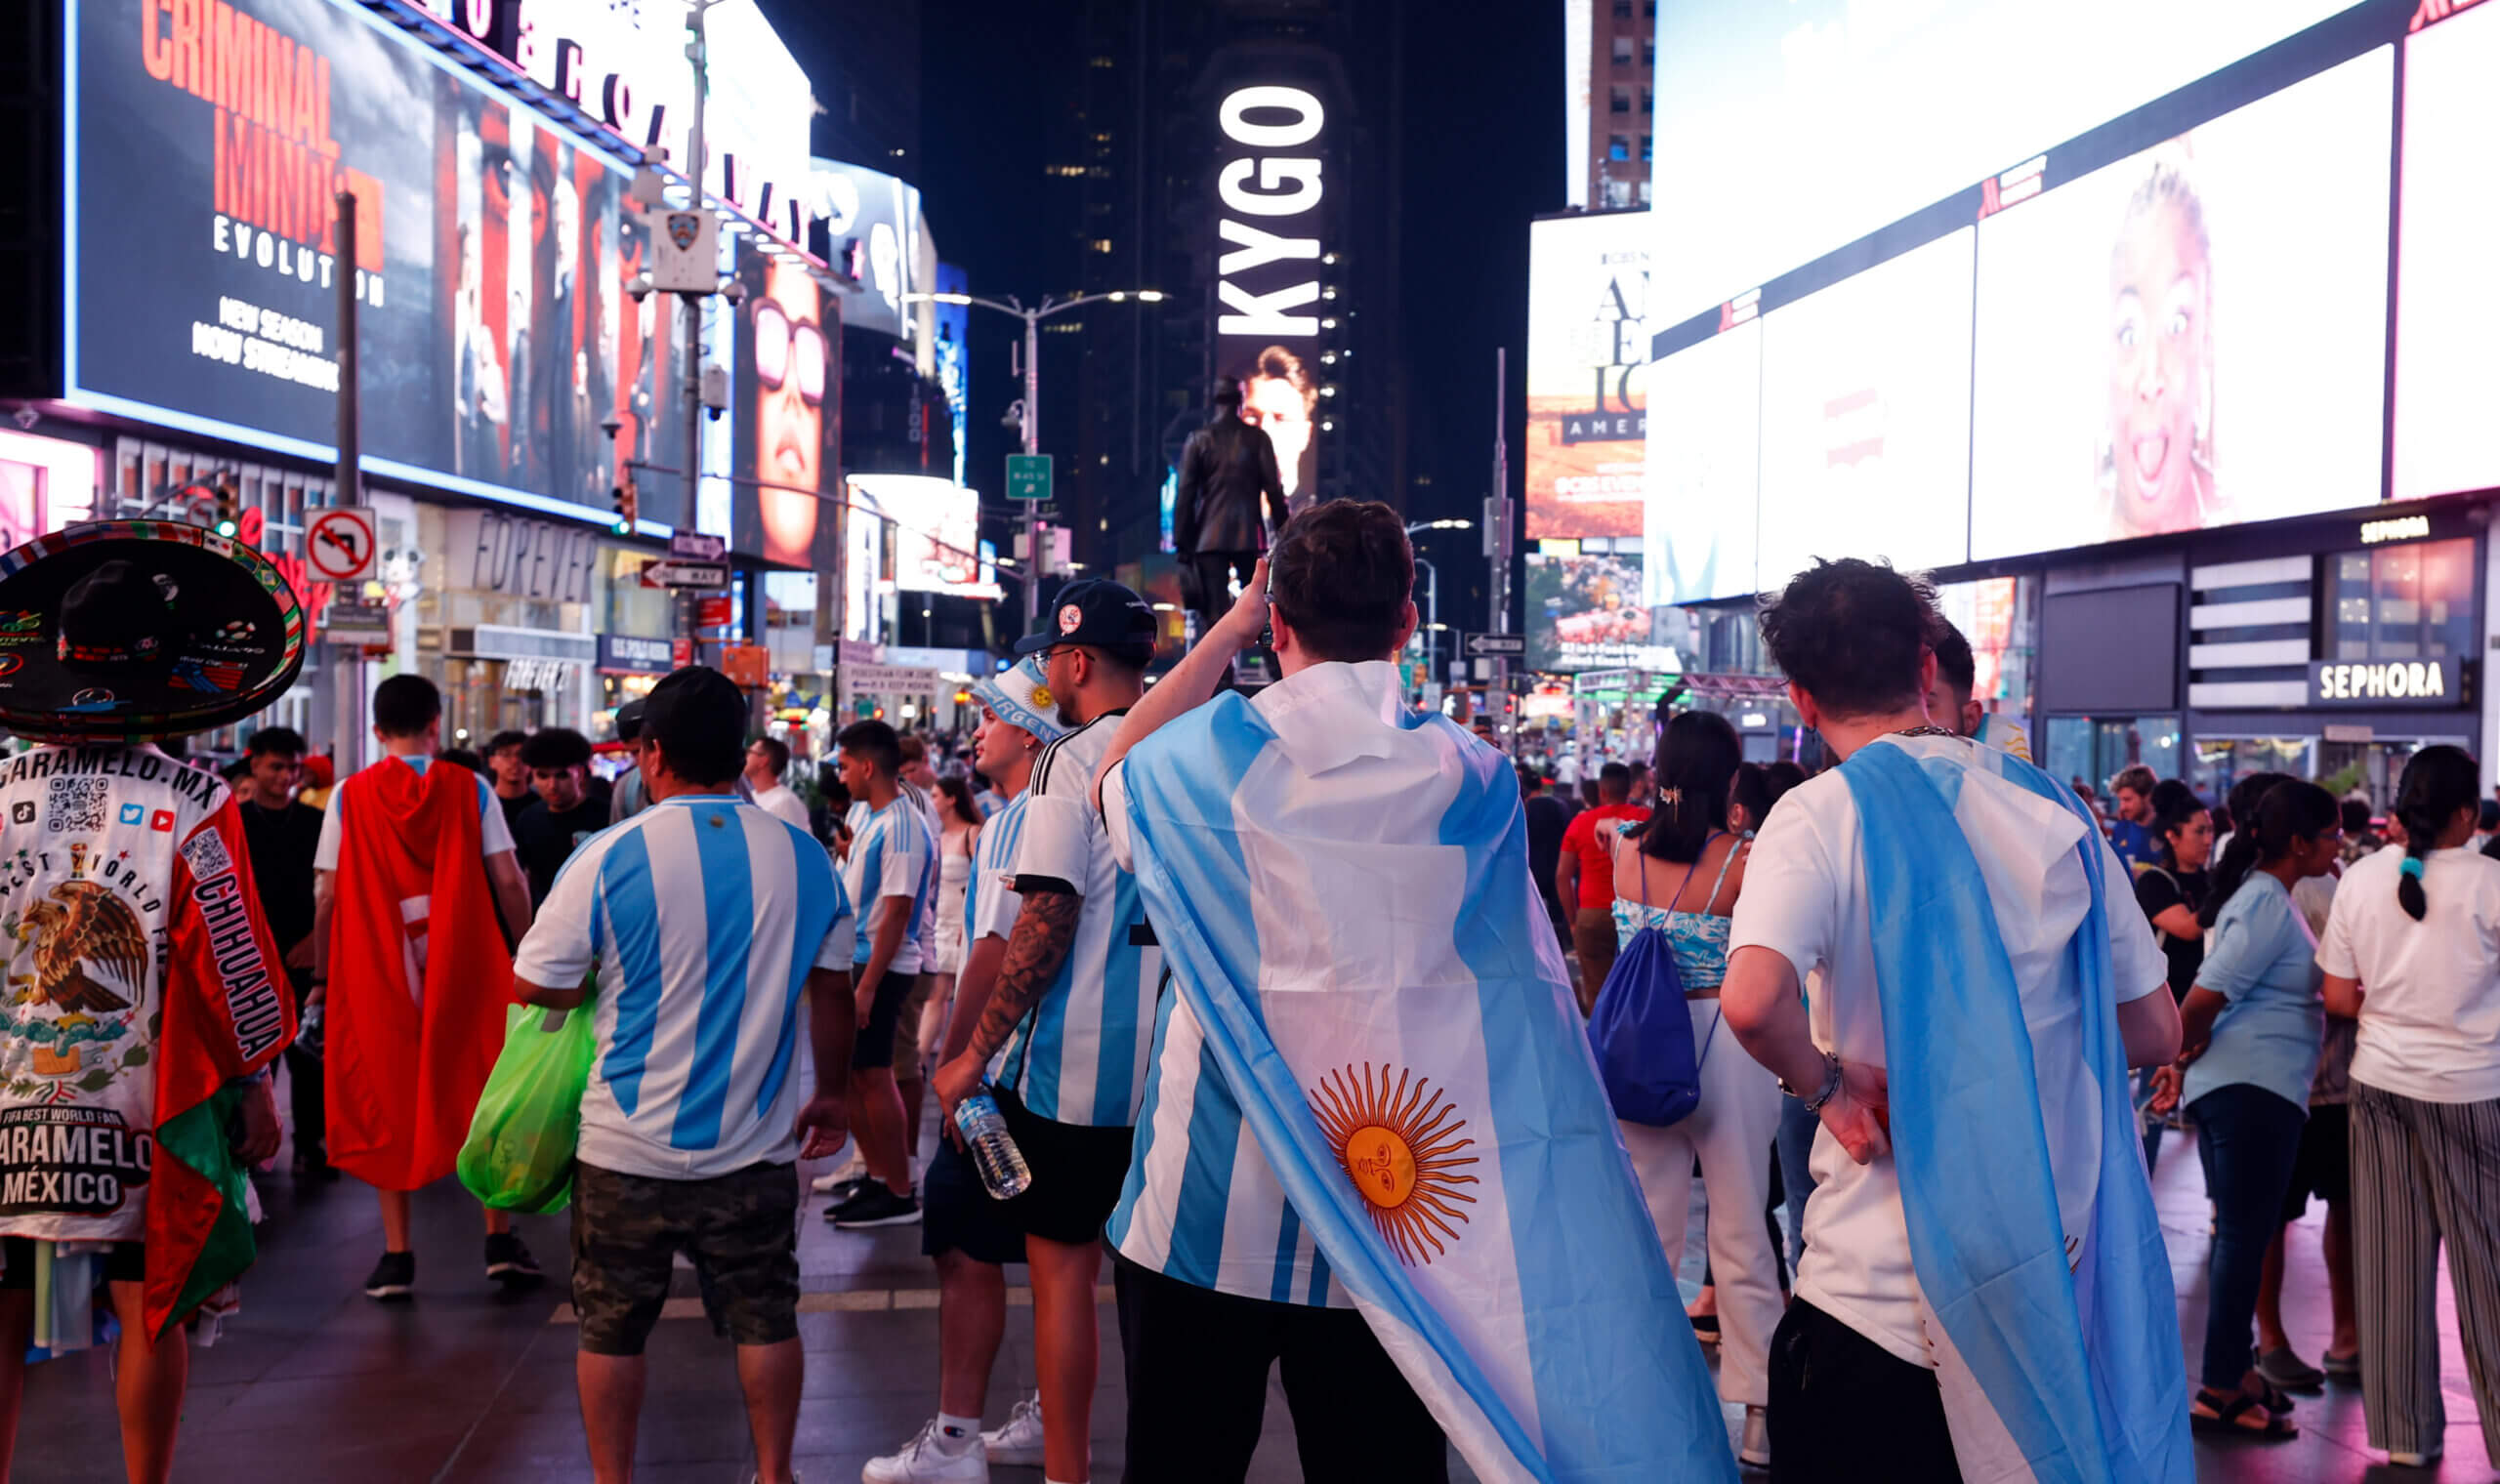 Argentina's rabid fans turned Times Square blue and white – and their team fought